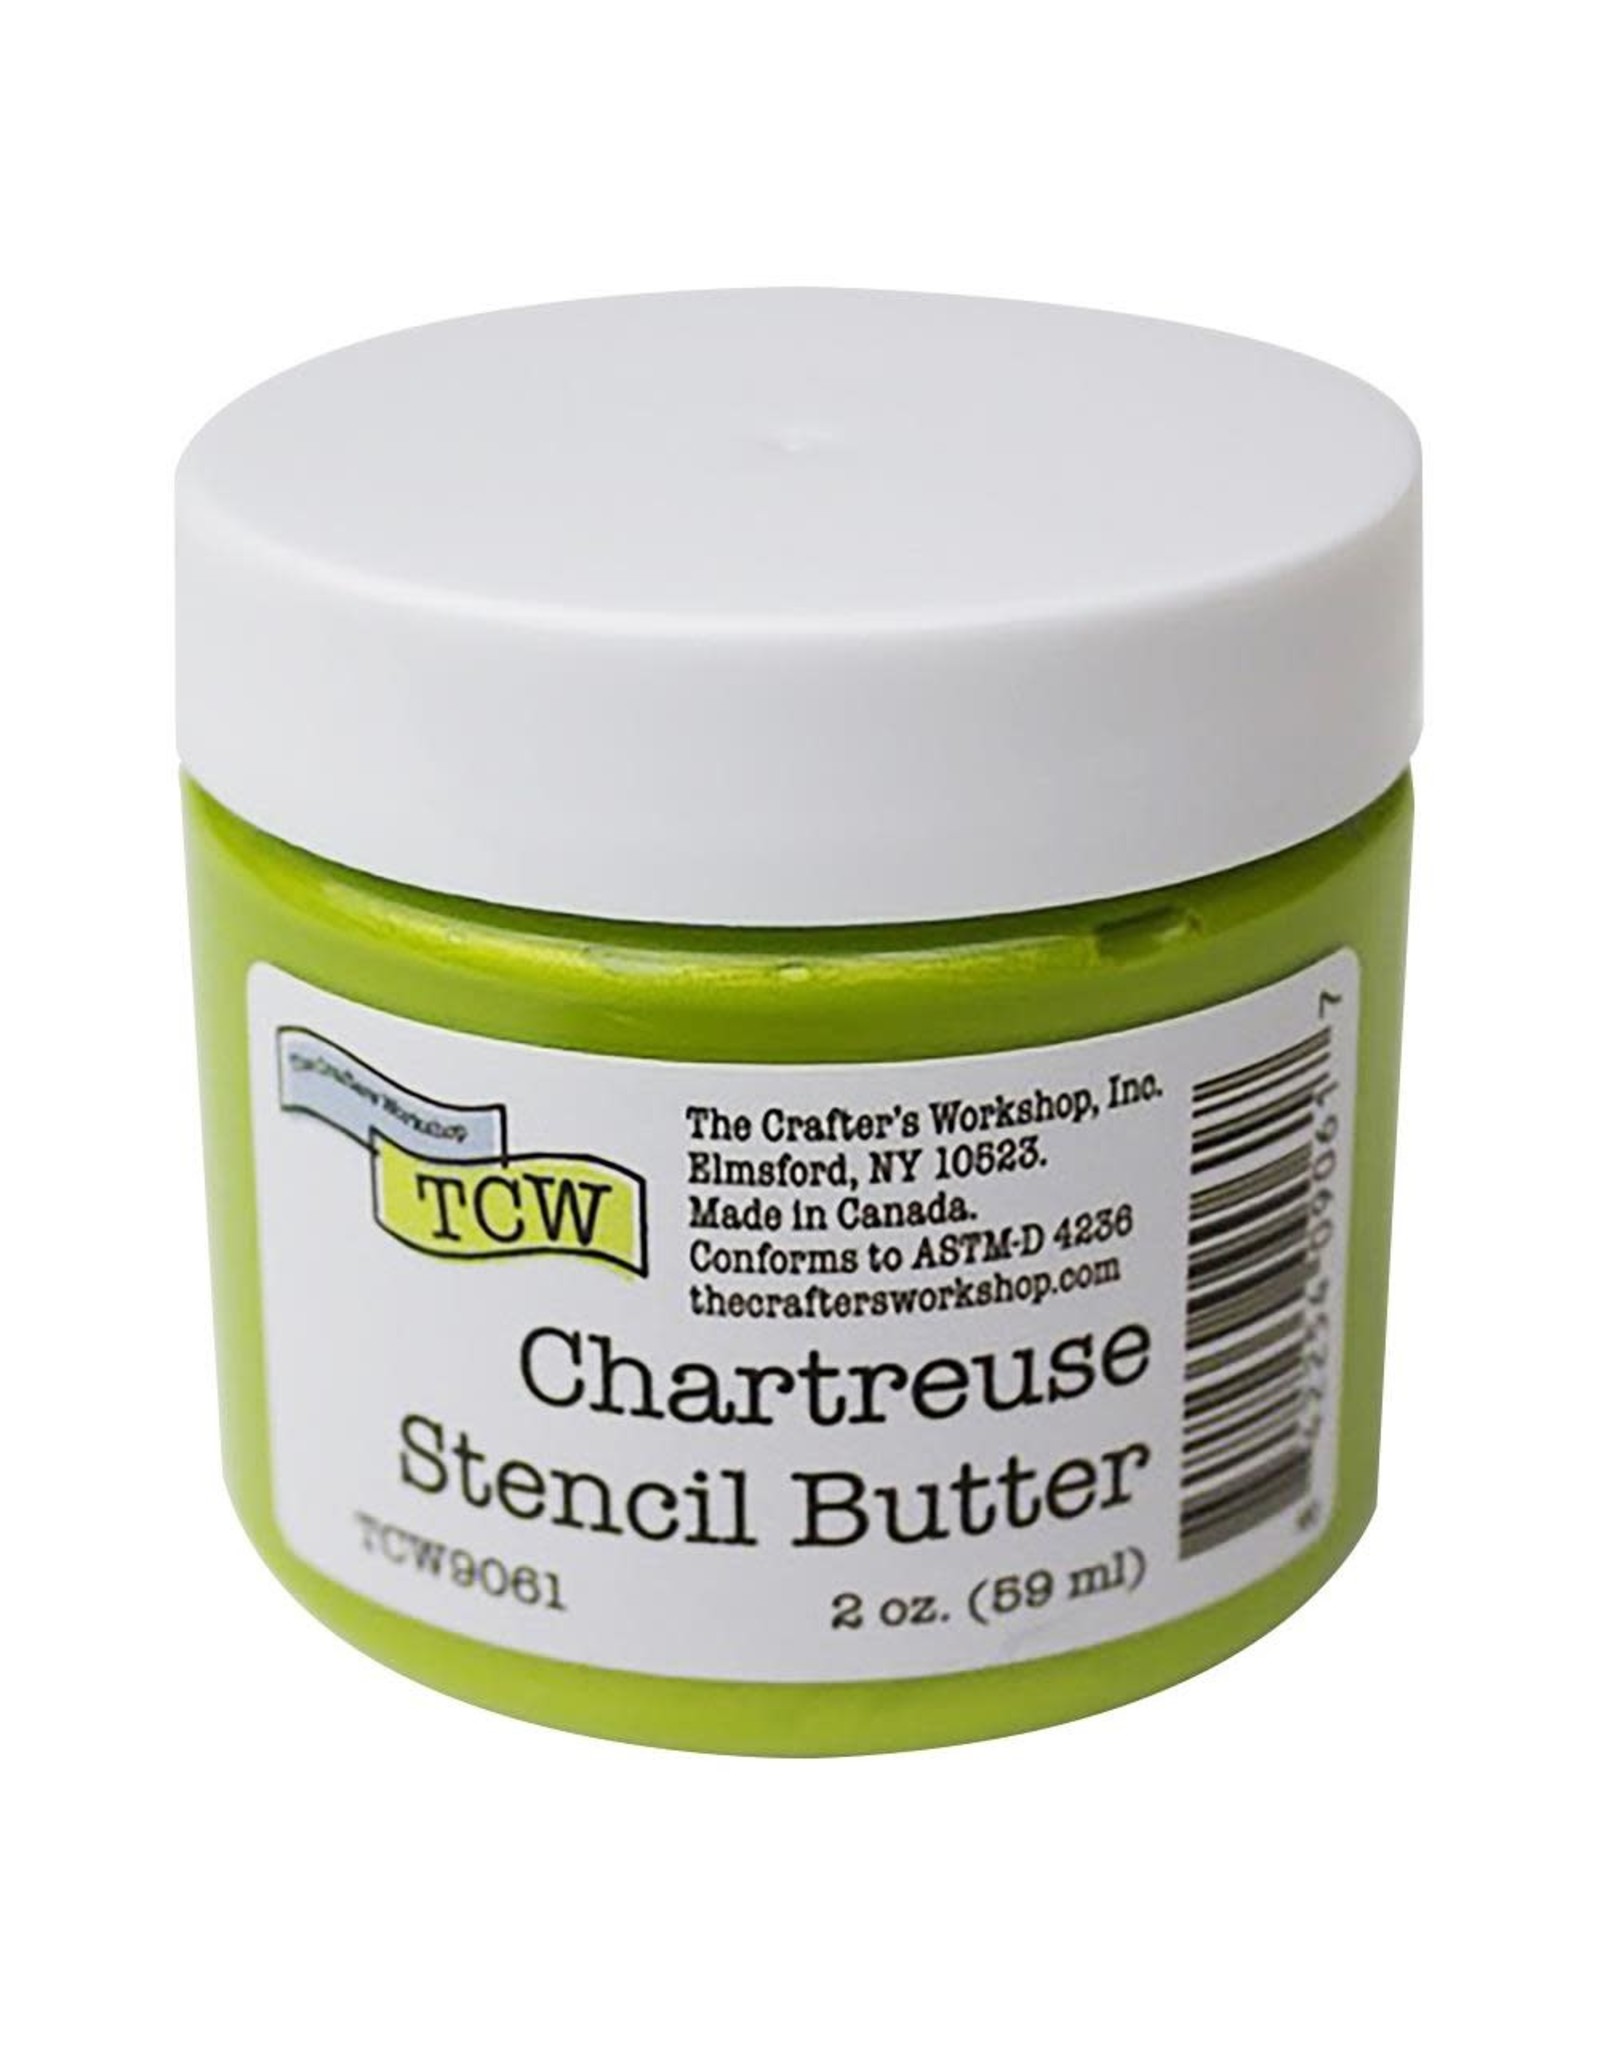 CRAFTERS WORKSHOP THE CRAFTERS WORKSHOP CHARTREUSE STENCIL BUTTER 2oz